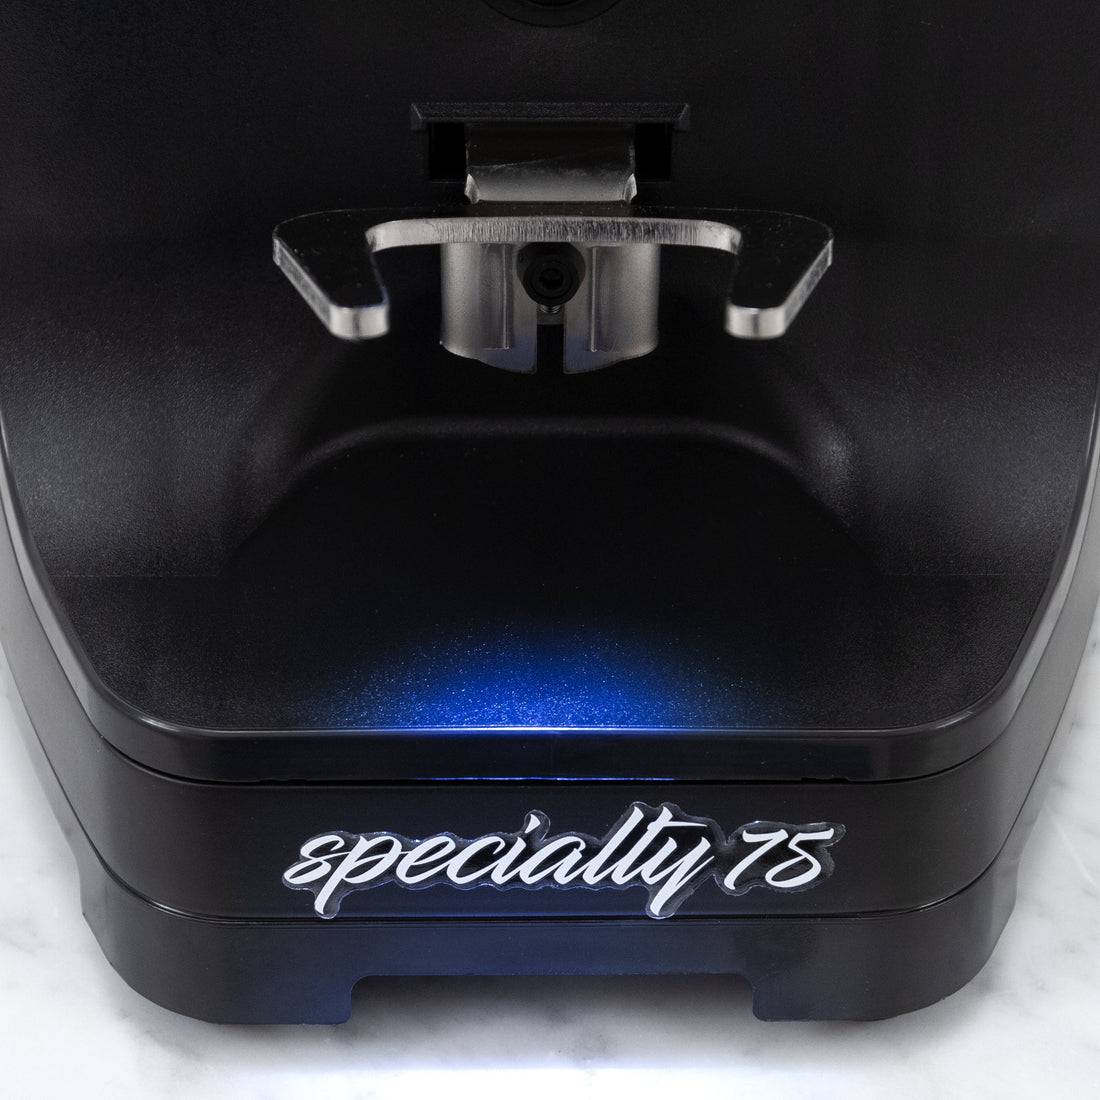 Portafilter hooks above the "specialty 75" logo on the base